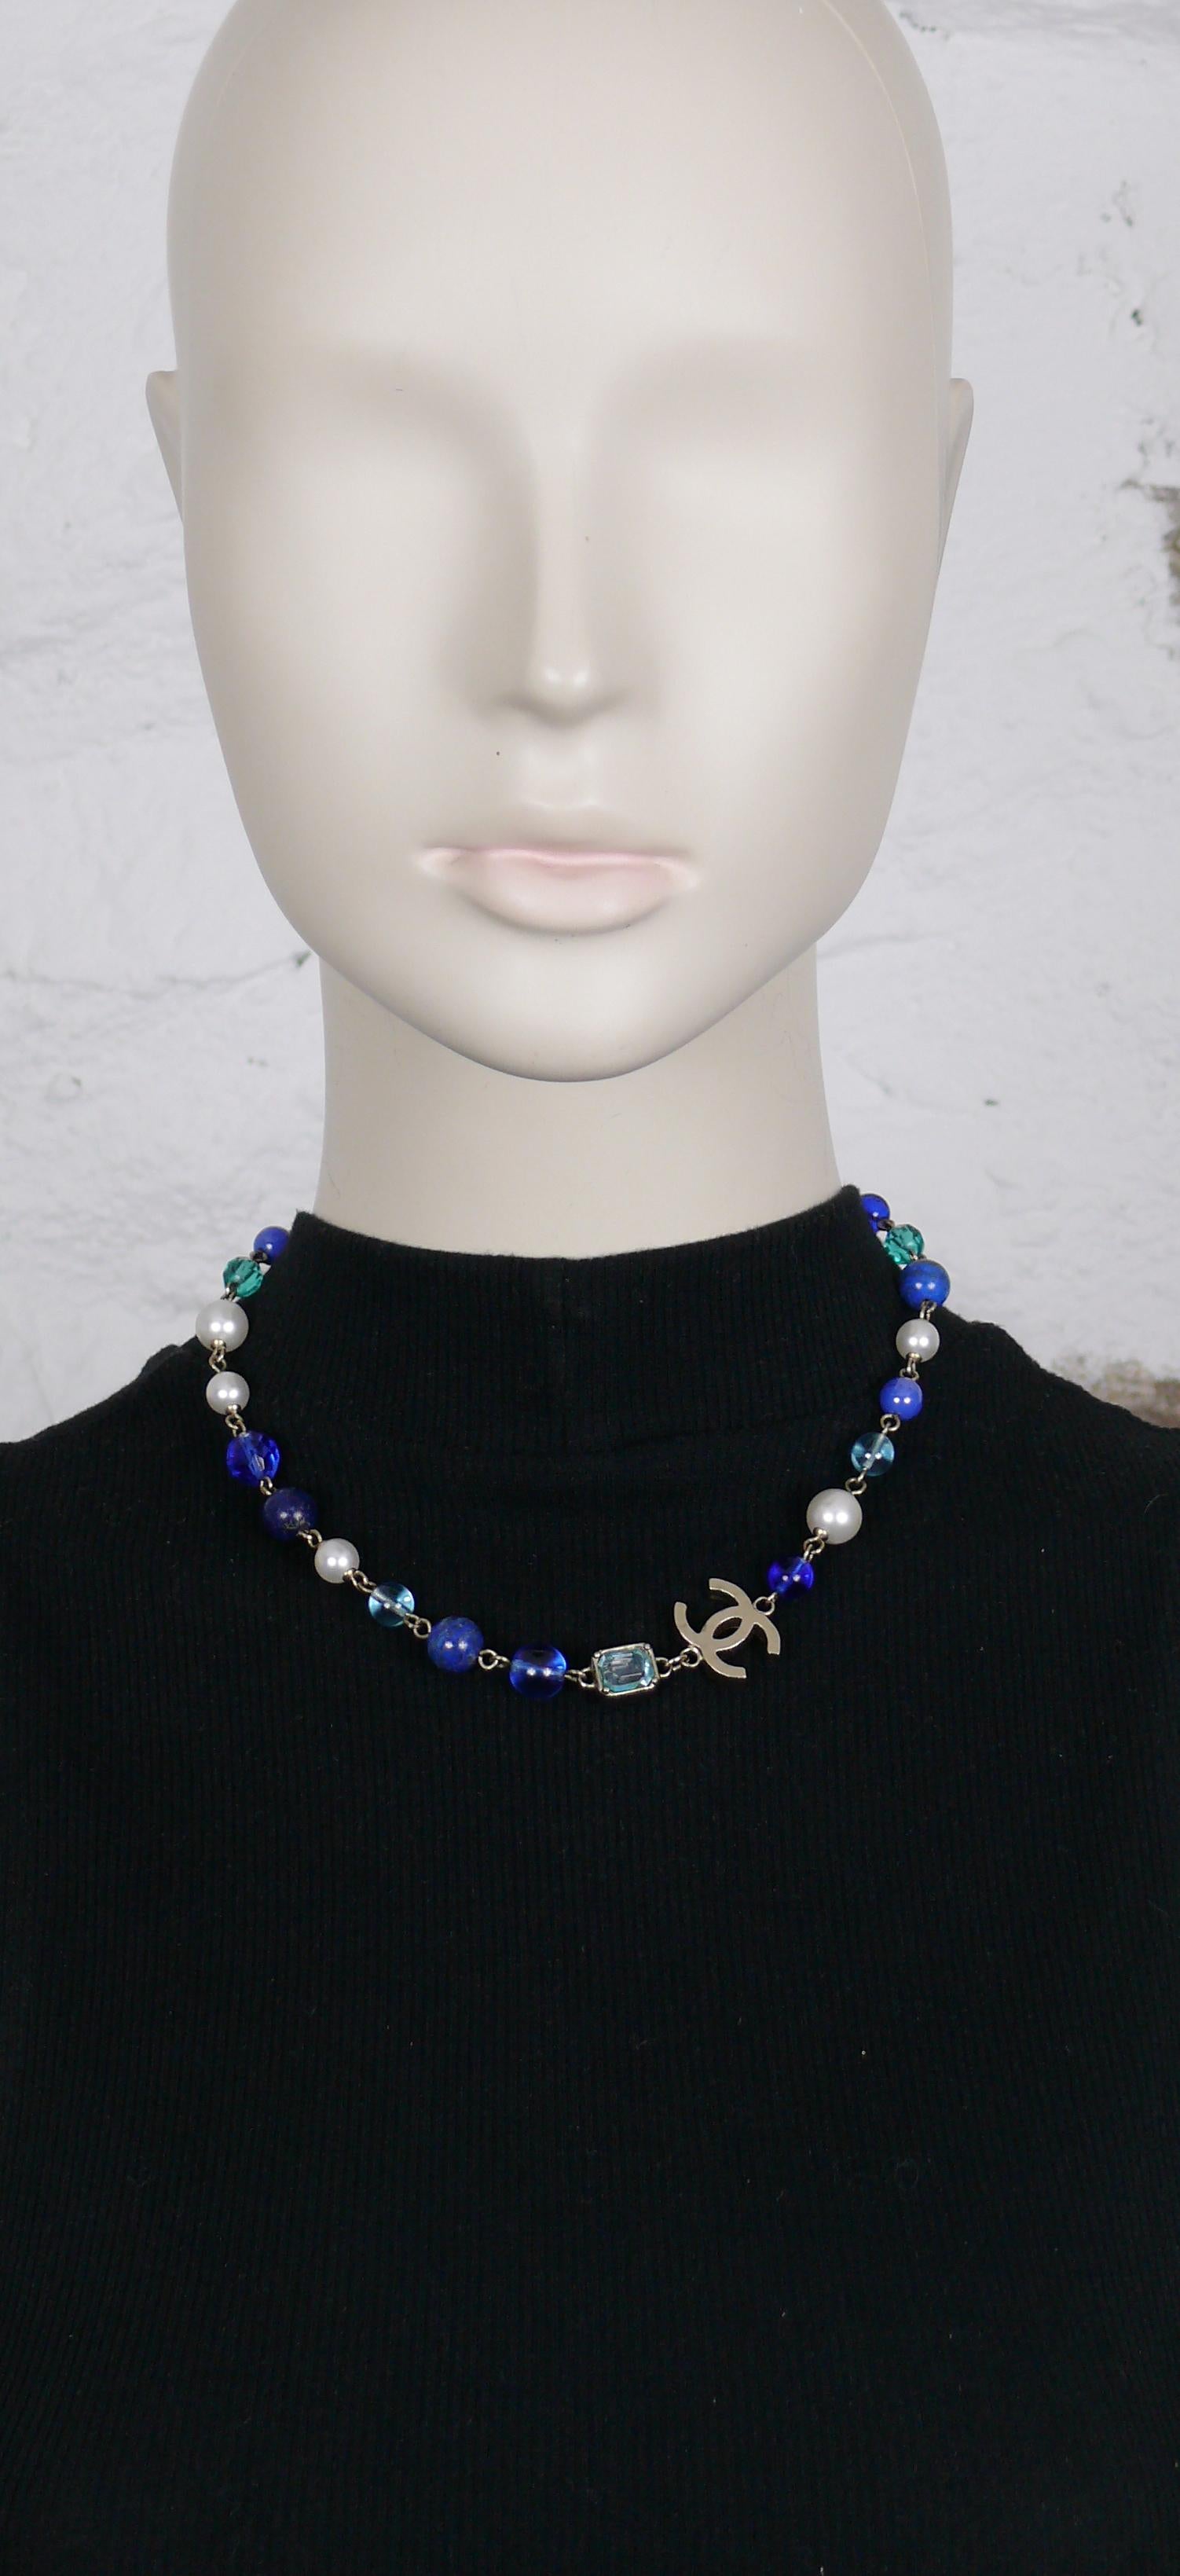 CHANEL short necklace made of turquoise blue facetted glass beads, faux pearls, blue glass beads, lapis lazuli pearls, aqua blue crystals and textured CC logo.

Please note that, to our opinion, the color of the hardware is very pale gold tone, but